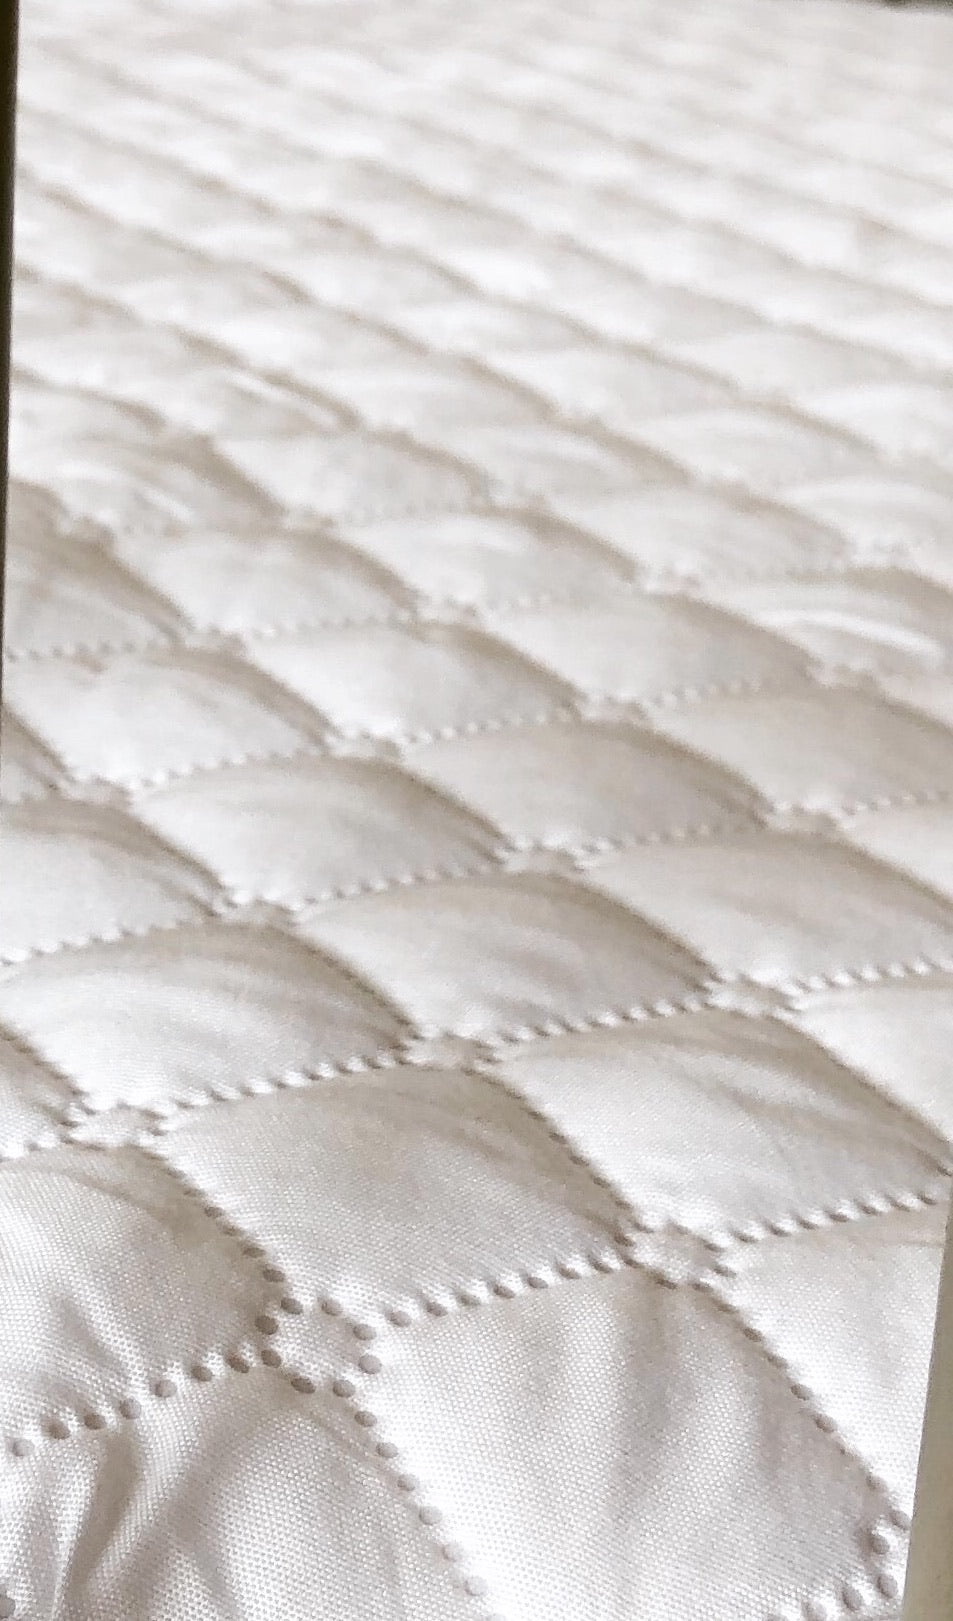 To fit Stokke Sleepi cot waterproof quilted mattress protector